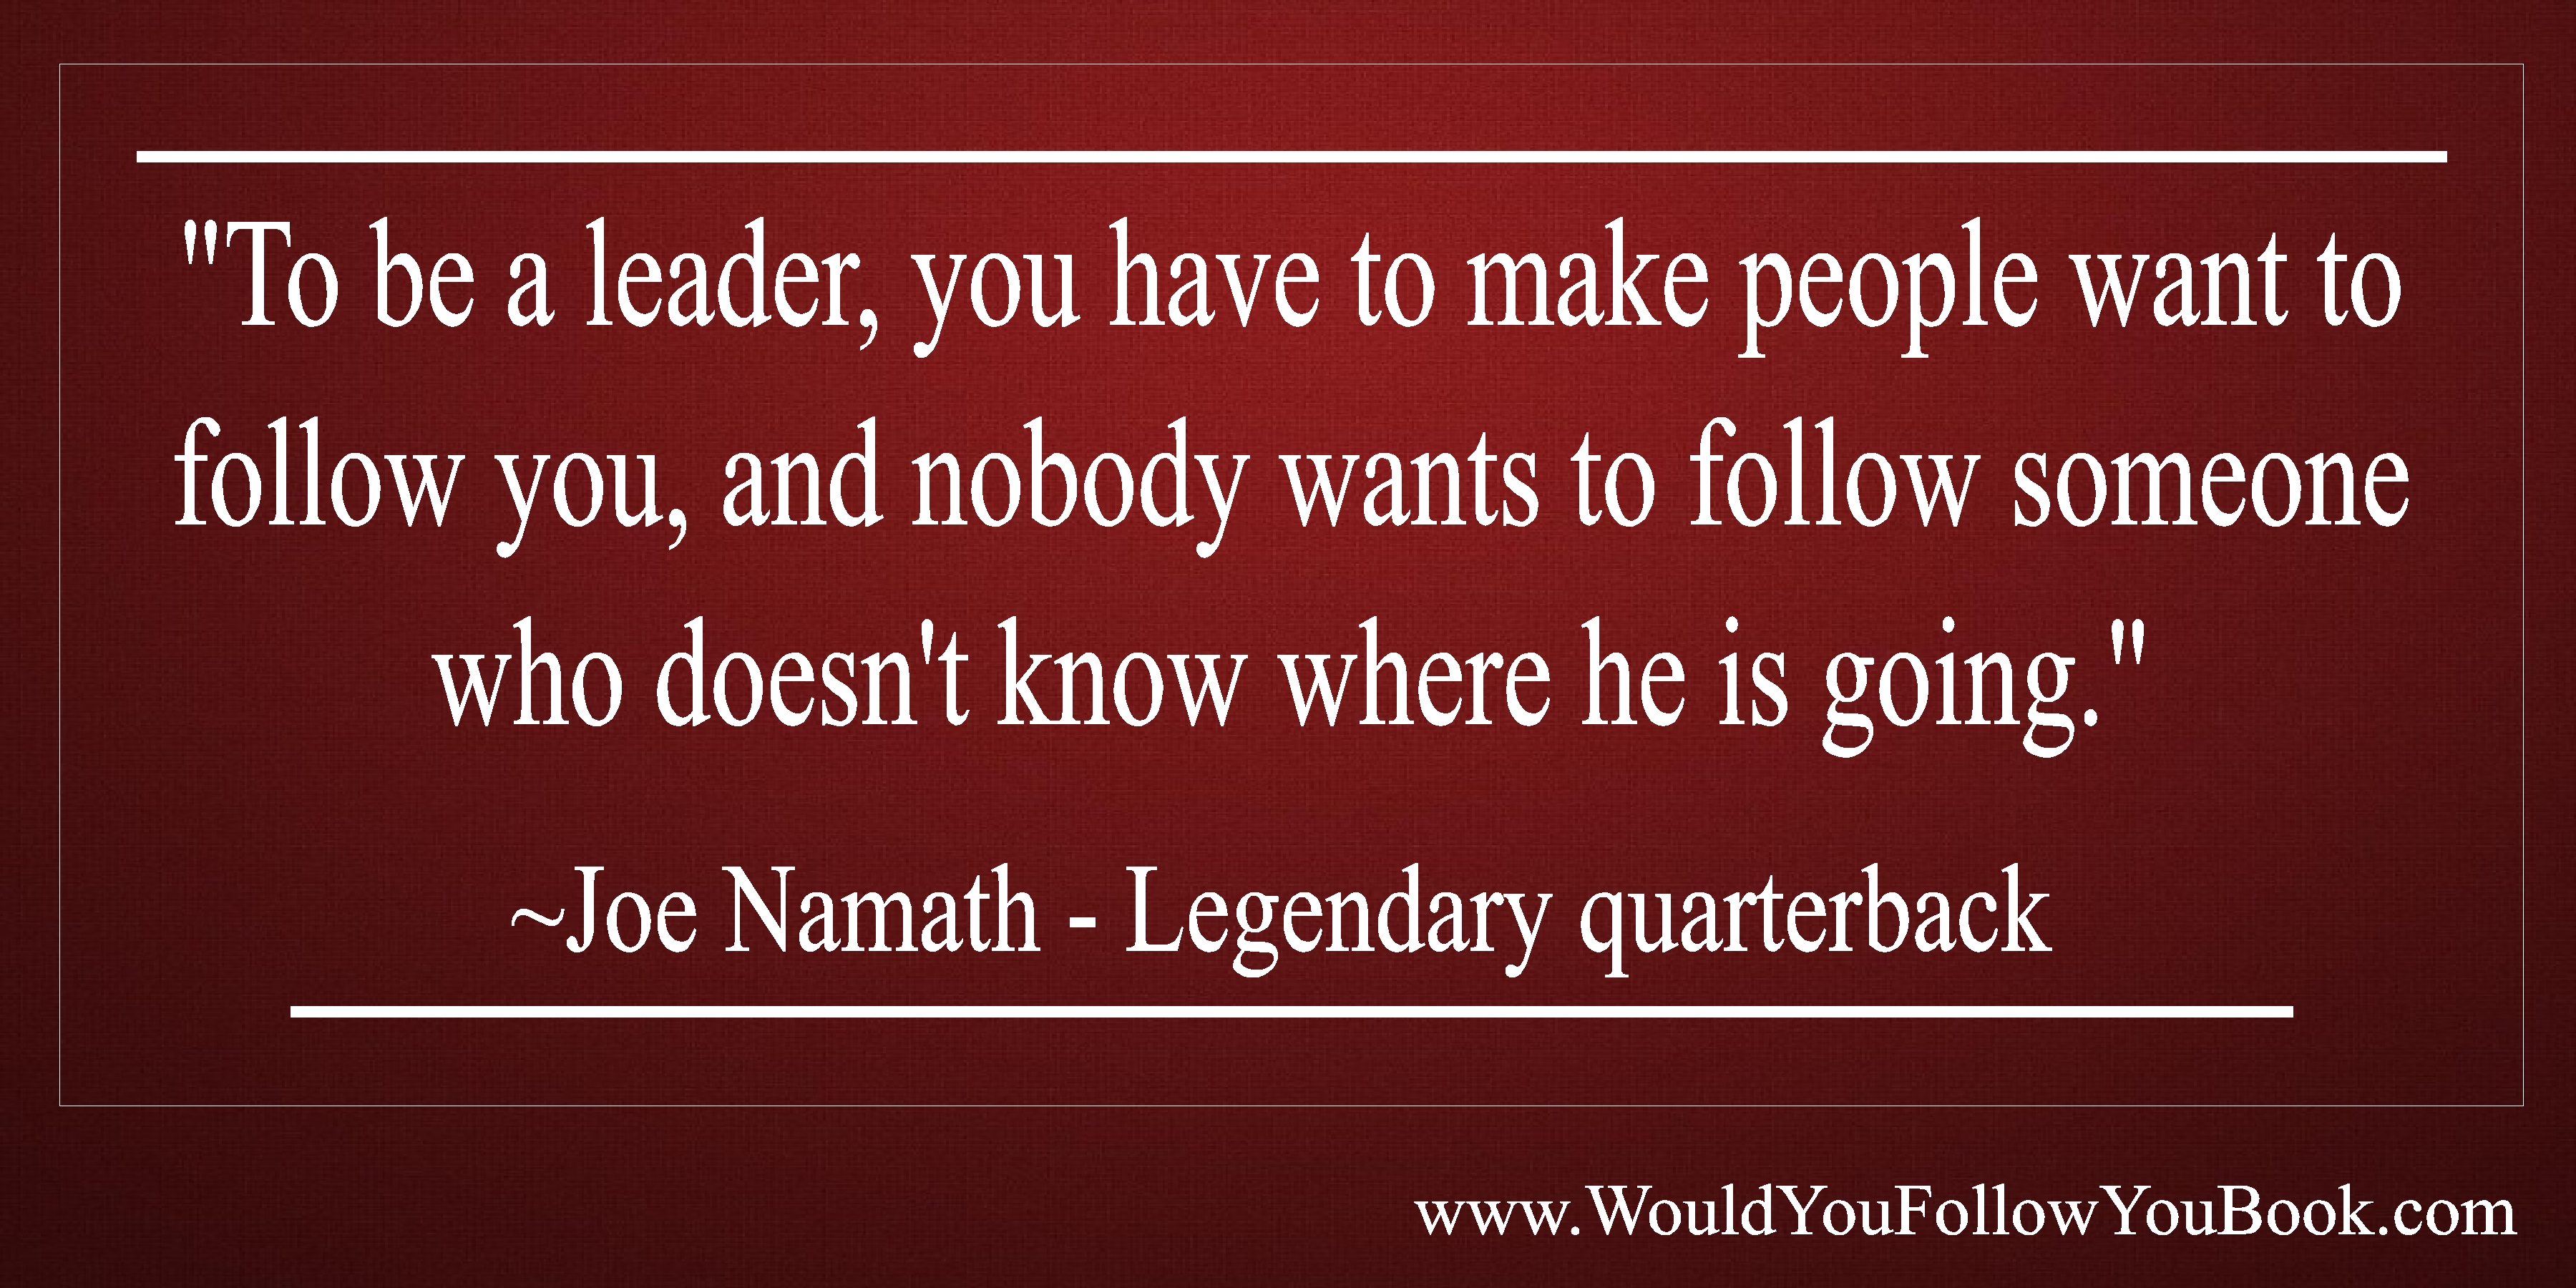 Leadership Thoughts and Quotes - Would You Follow You?